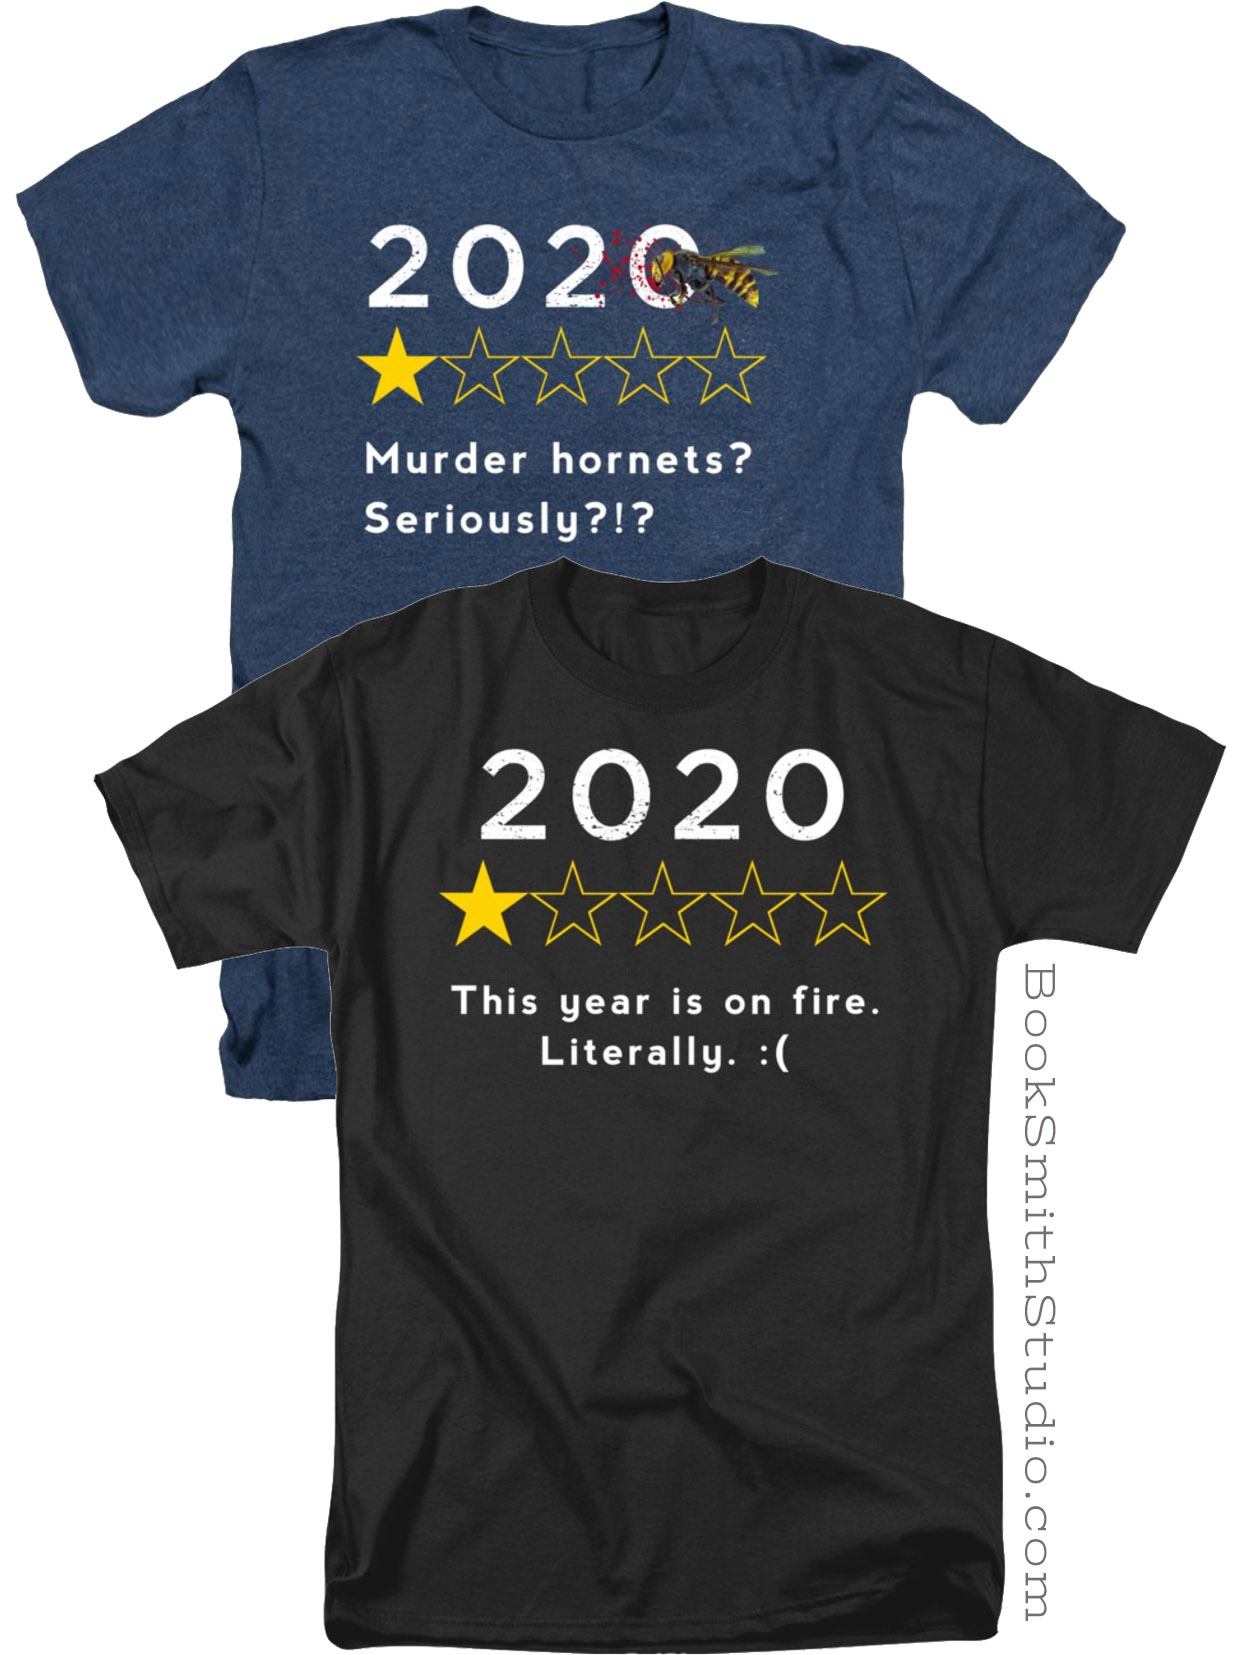 2020 Review t-shirts: Murder hornets? Seriously?